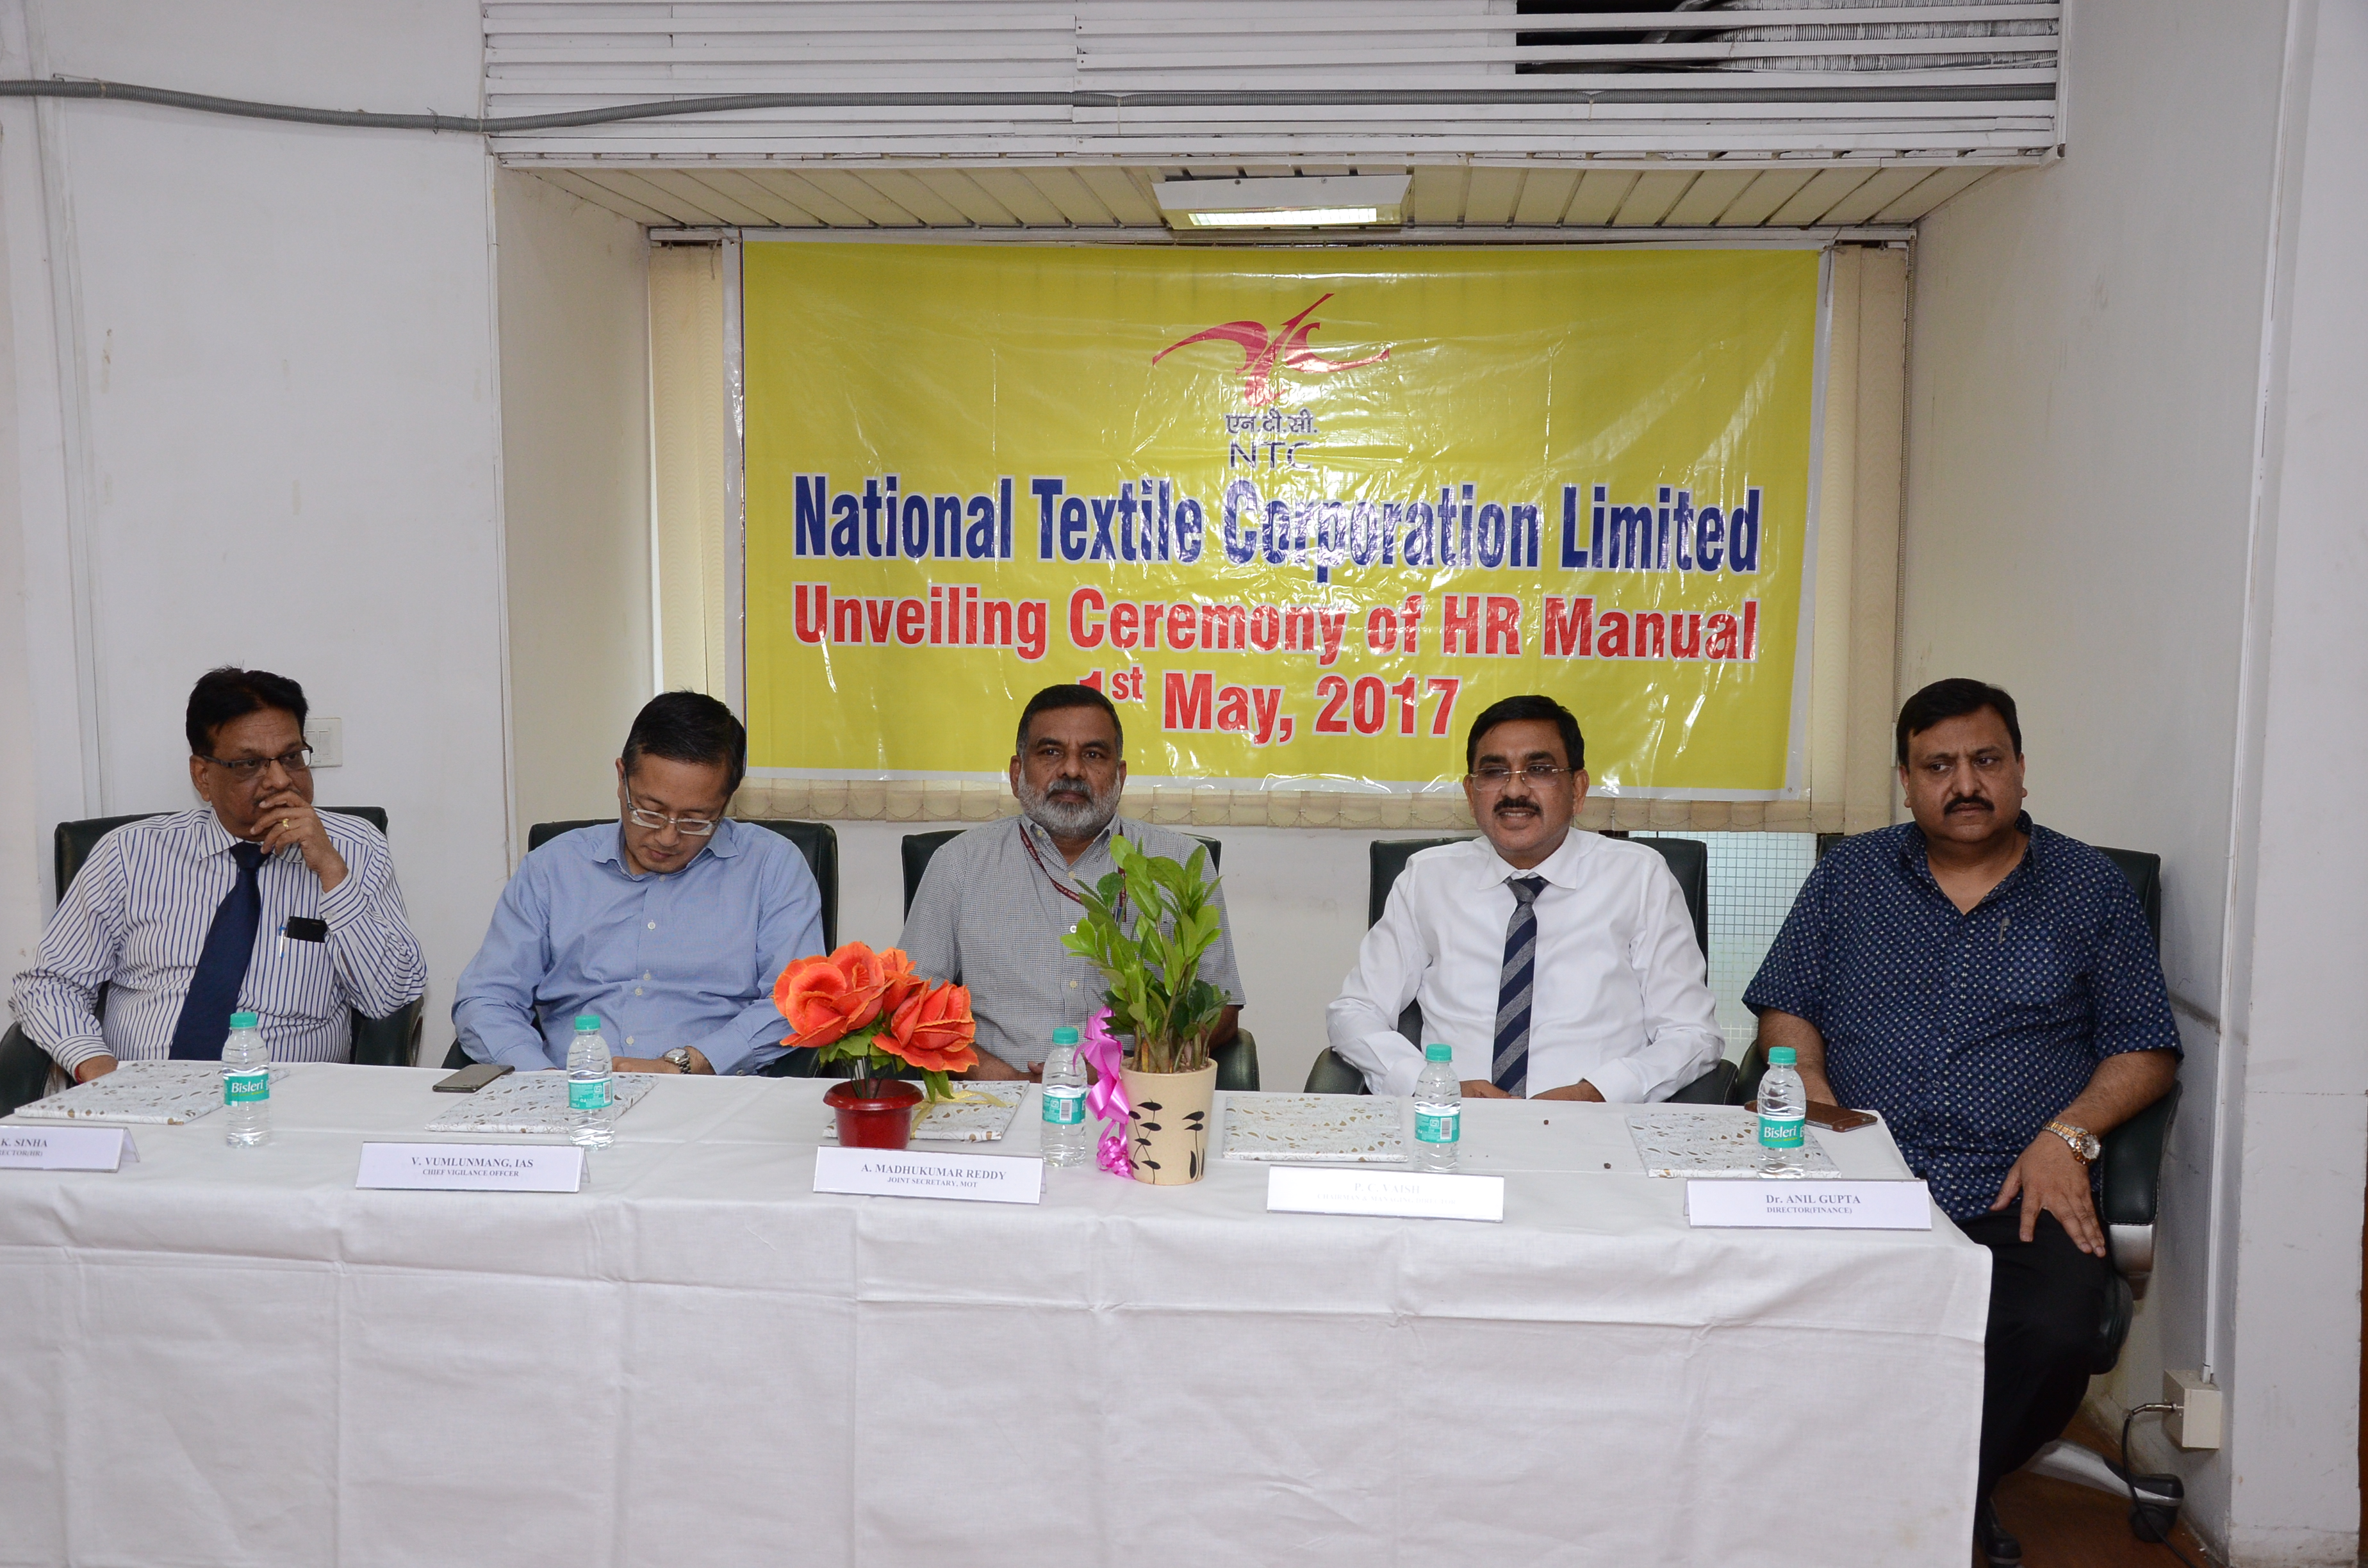 Honorable Shri A. Madhukumar Reddy, Joint Secretary, Ministry Of Textiles, Shri P. C. Vaish, Chairman and Managing Dierctor NTCL, Shri R. K. Sinha, Director(HR), Dr. Anil Gupta Director(Finance) and Shri V. Vumlunmang, CVO on the occasion of Unveiling Ceremony of HR Manual.